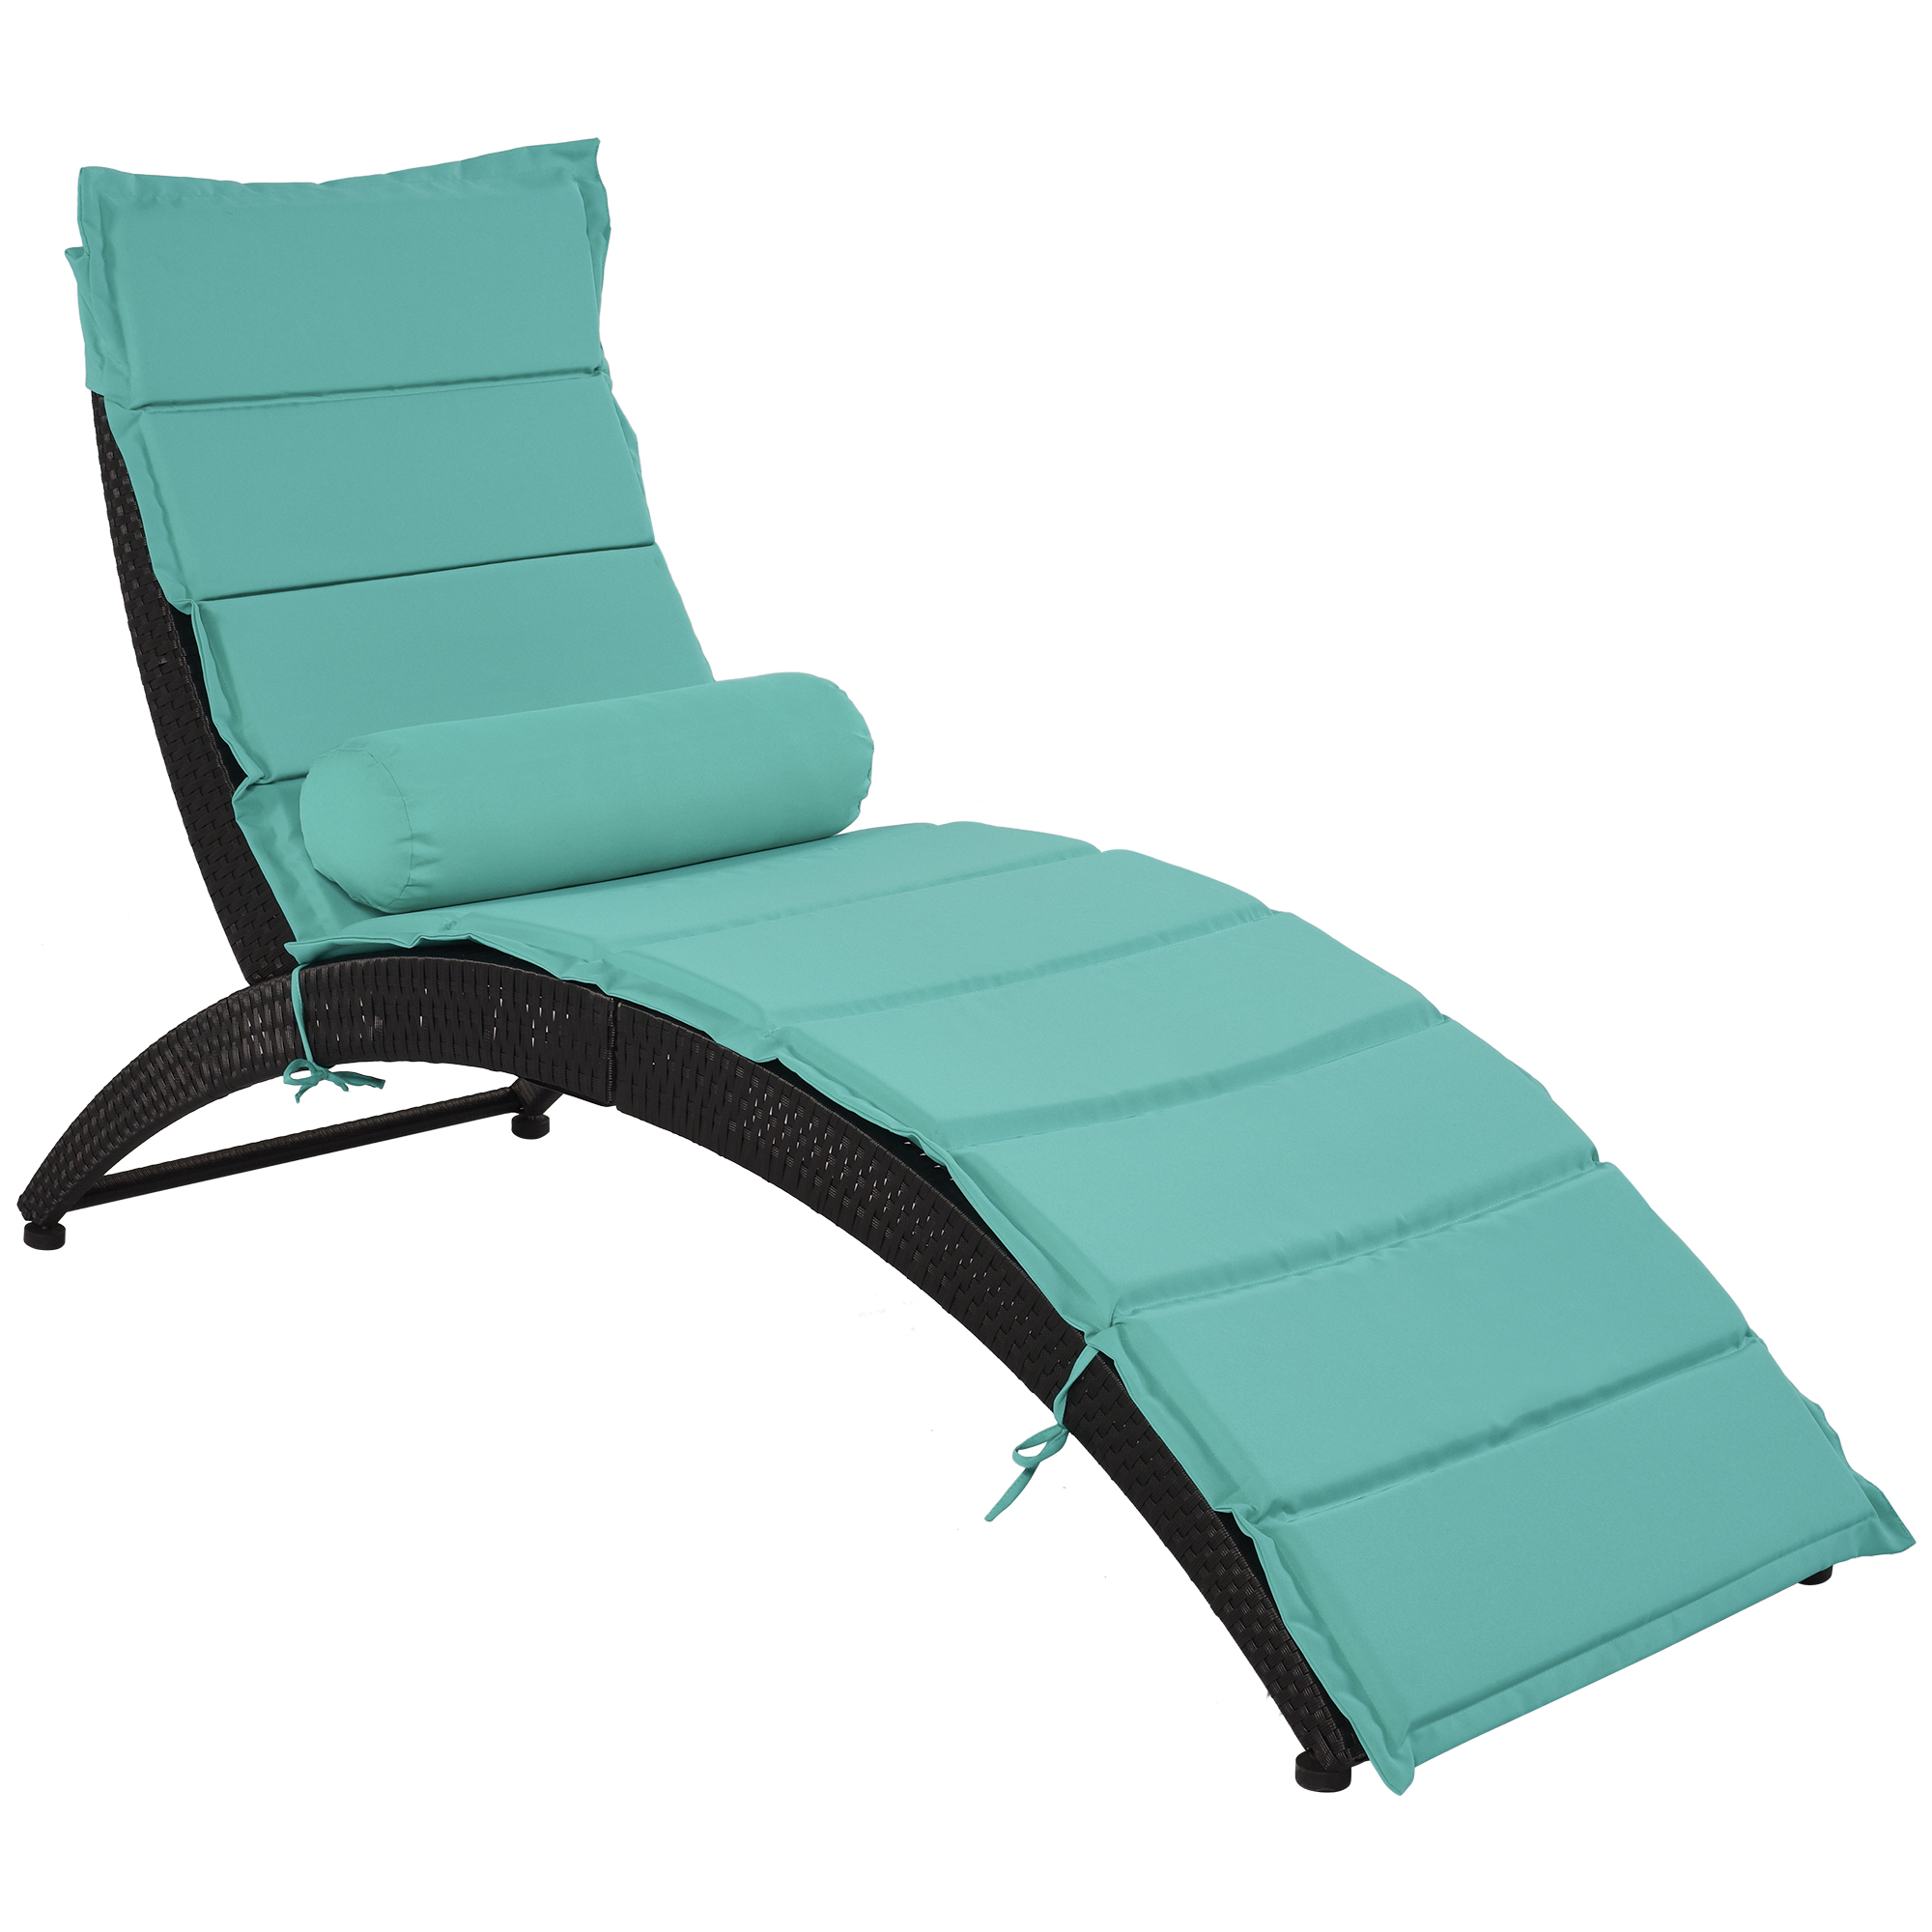 BTMWAY Outdoor Wicker Chaise Lounge, All-Weather Rattan Lounge Chair with Cushion and Head Pillow, Patio Furniture Sun Lounger Foldable Chaise Lounger, Folding Sunbed Tanning Recliner for Beach Pool - image 3 of 11